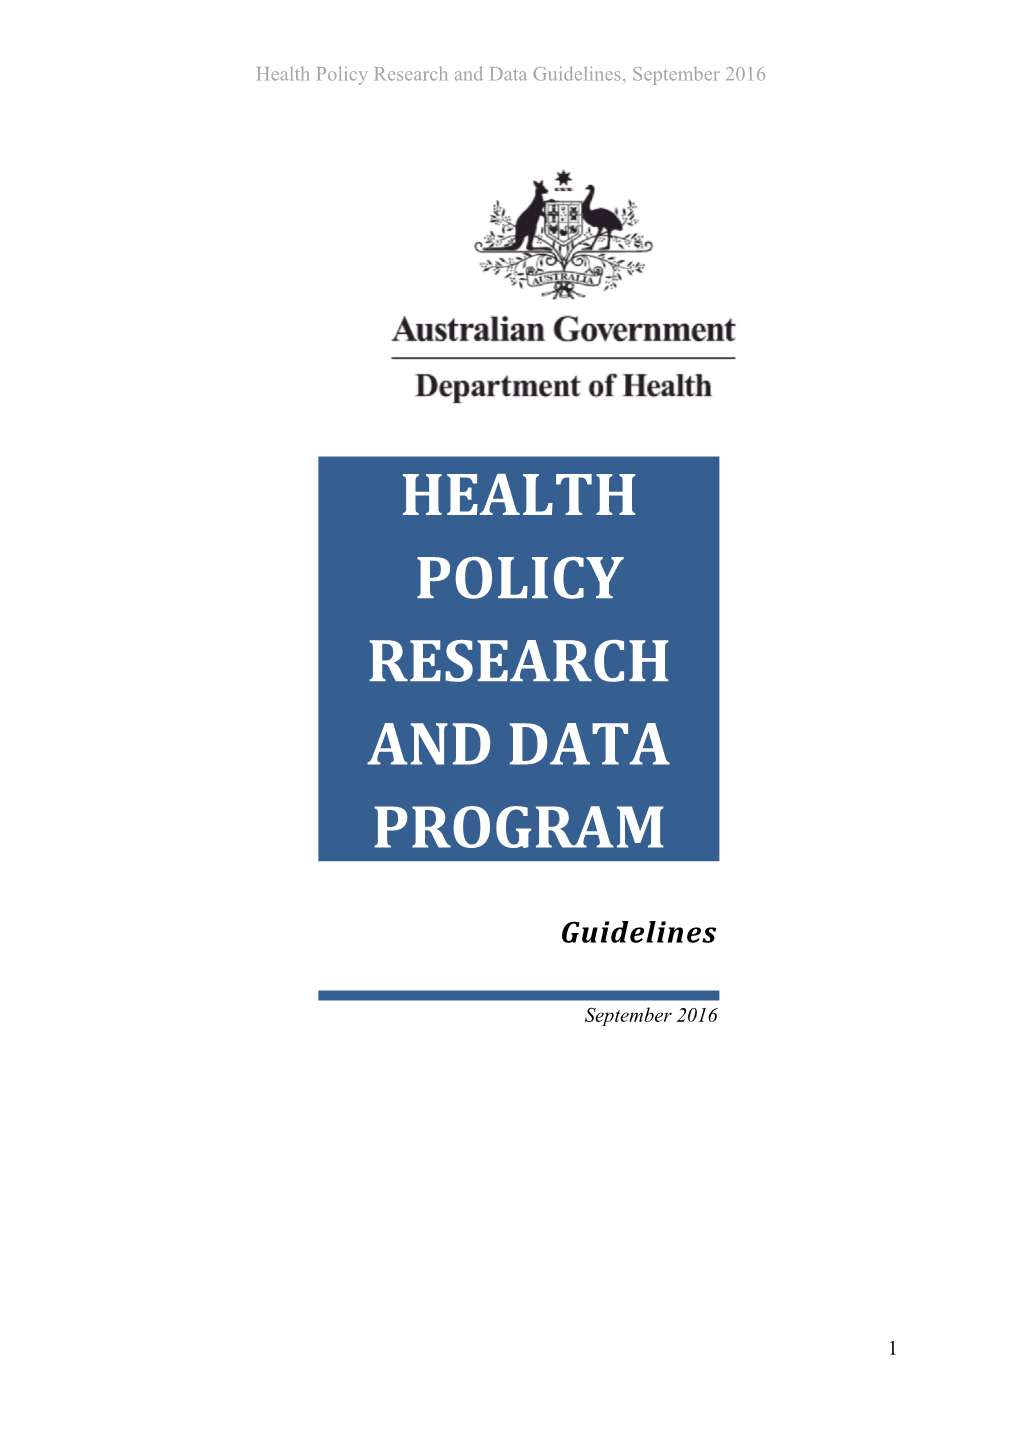 HEALTH POLICY RESEARCH and DATA Program